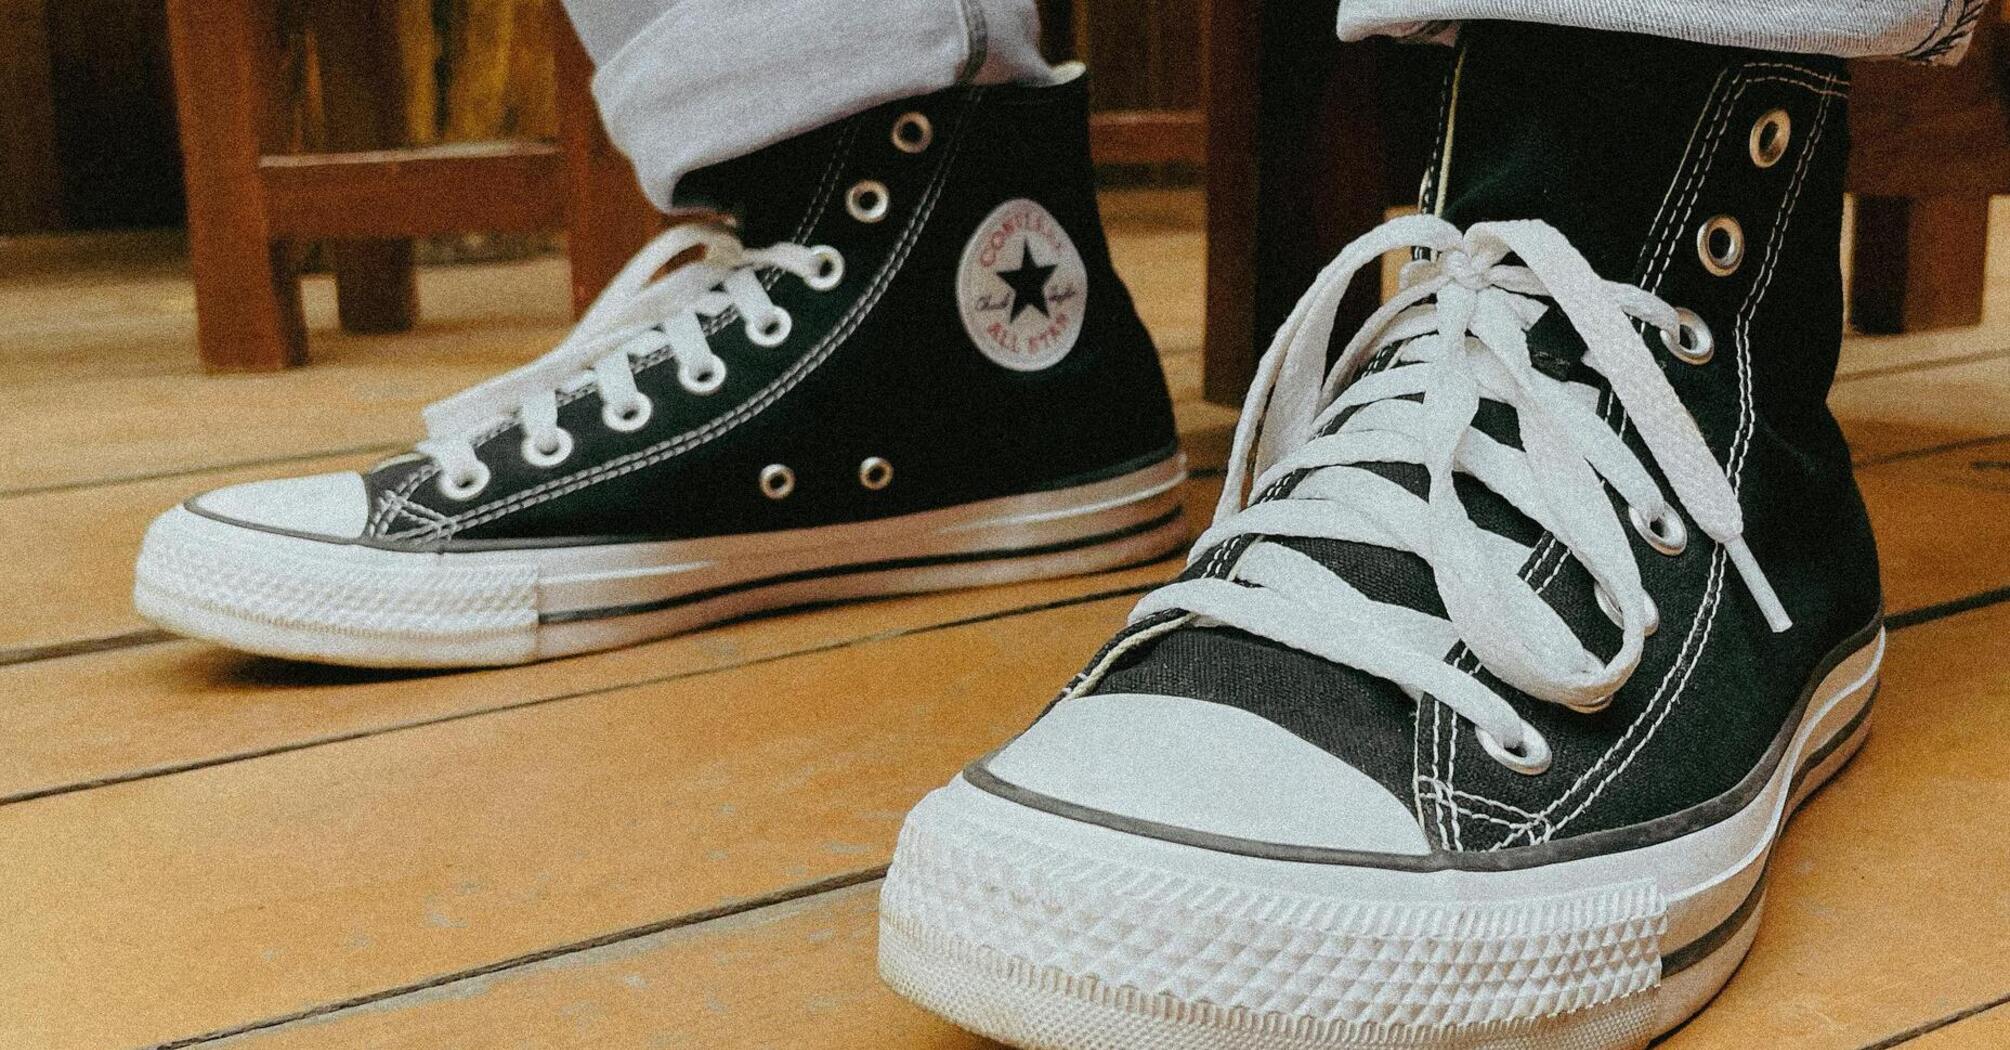 How to whiten your shoelaces in 10 minutes: 3 handy tips and tricks